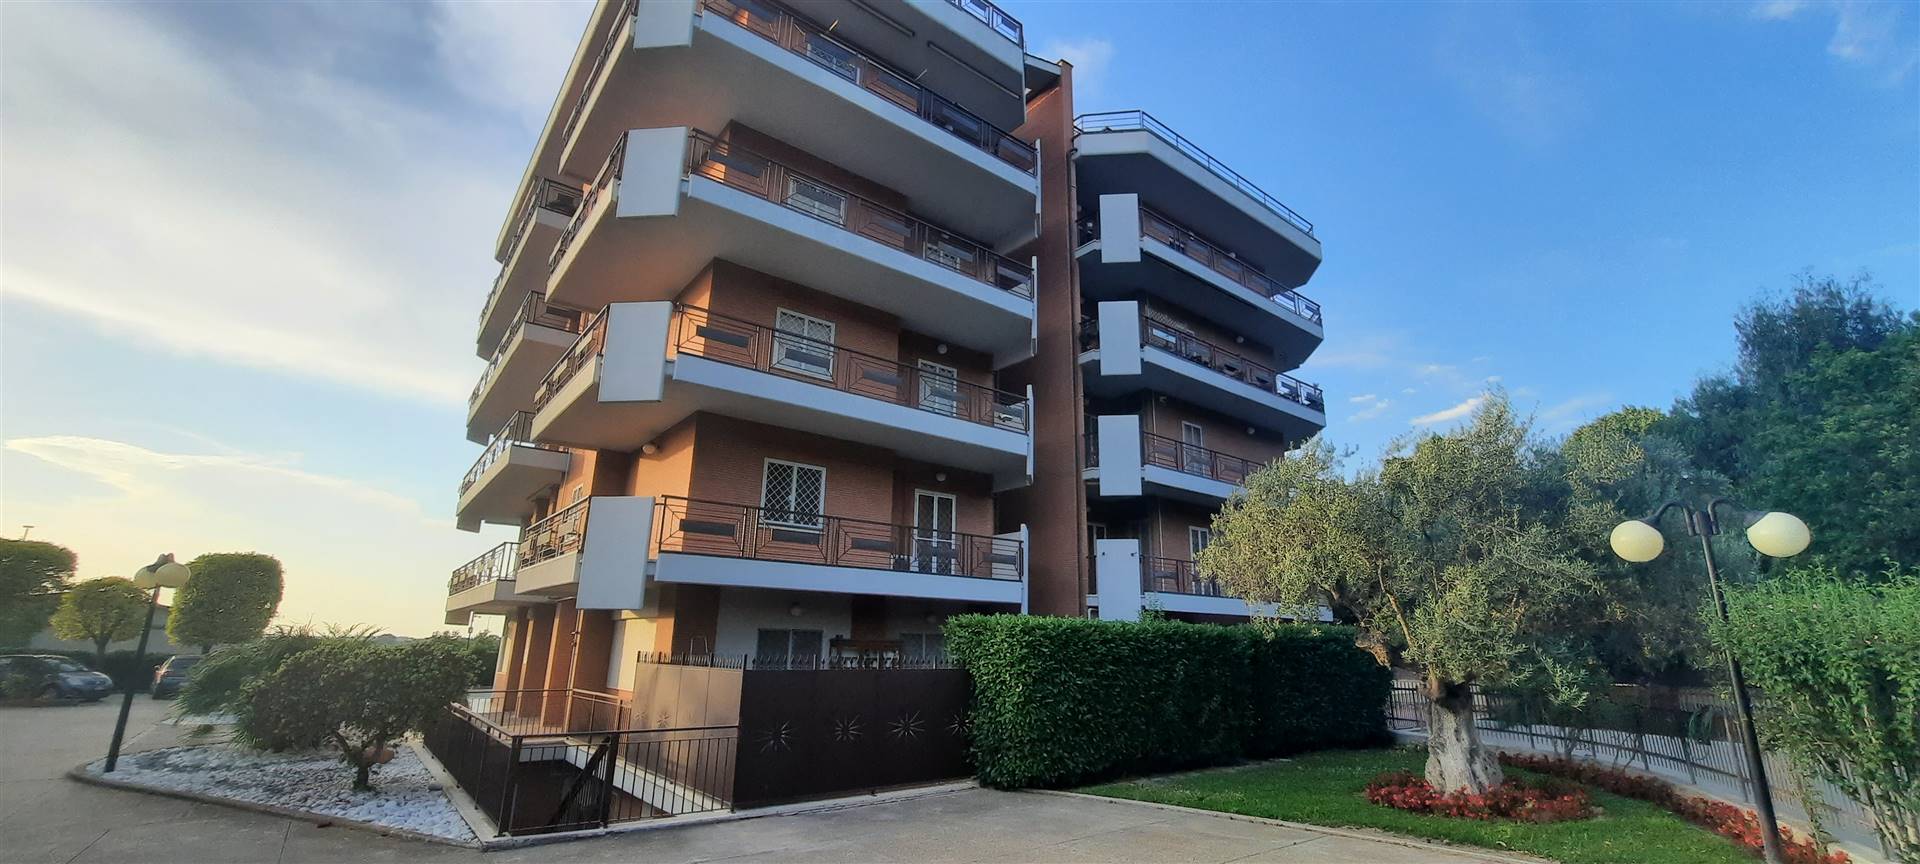 ROMANINA, ROMA, Apartment for rent of 67 Sq. mt., Good condition, Heating Individual heating system, Energetic class: G, Epi: 175 kwh/m2 year, placed 